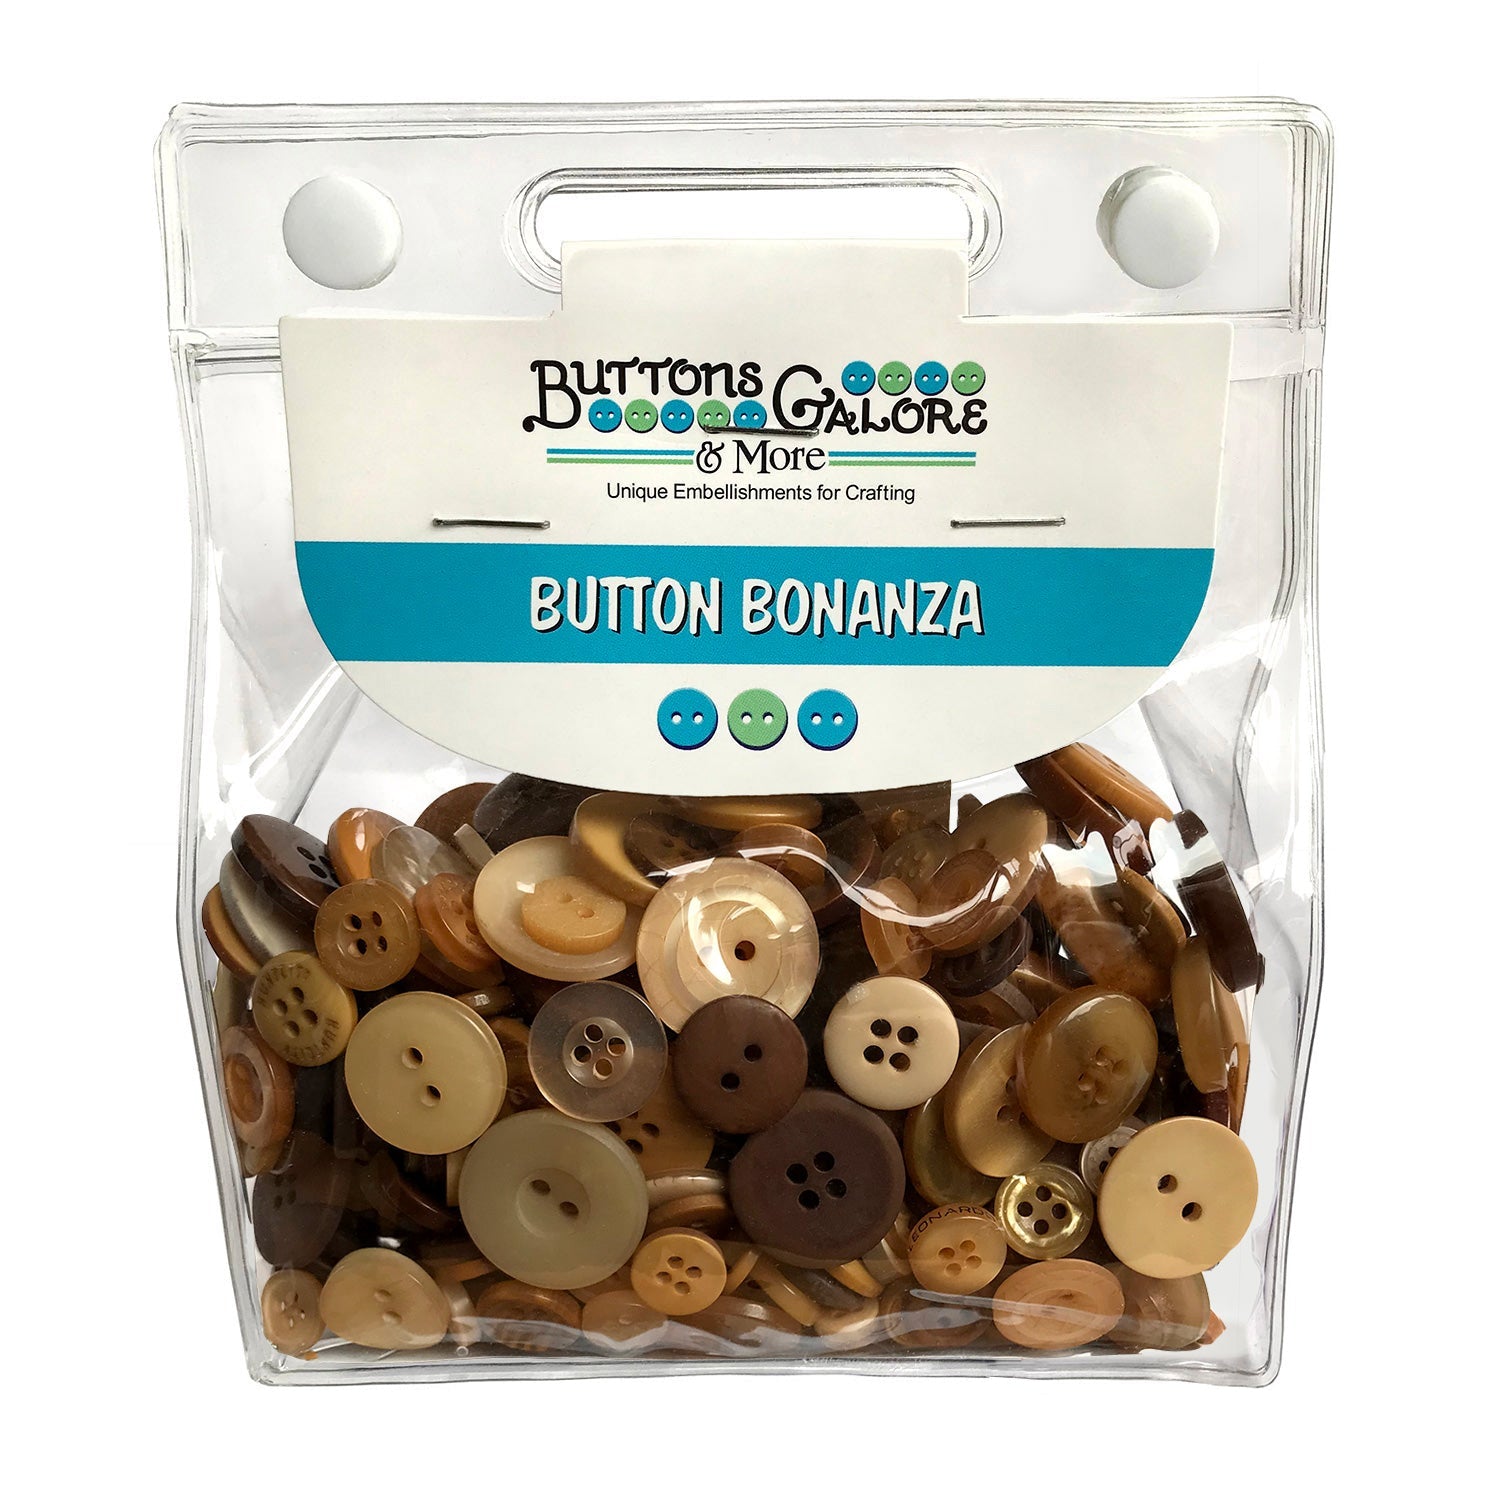 Brown Sewing Buttons. Buttons in Bulk for Button Crafts